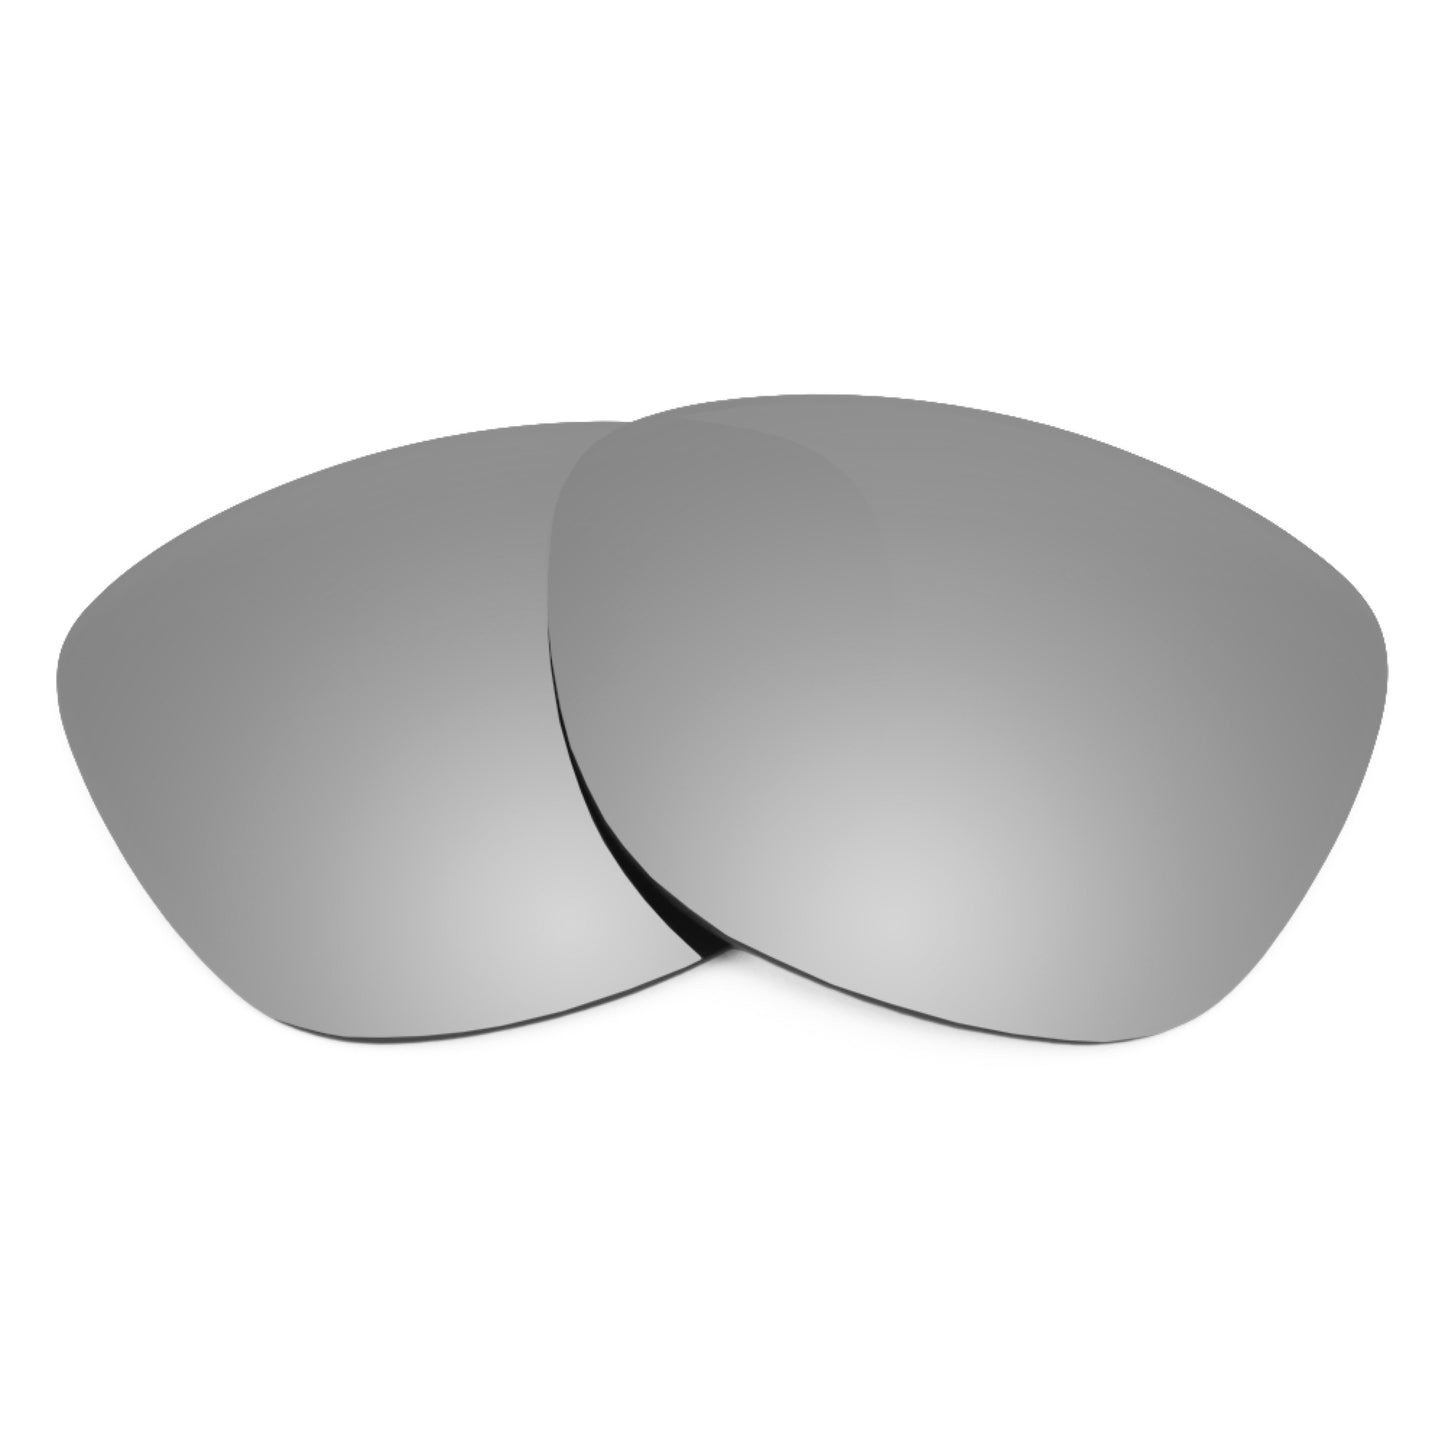 Revant replacement lenses for Ray-Ban Justin RB4165 51mm Non-Polarized Titanium